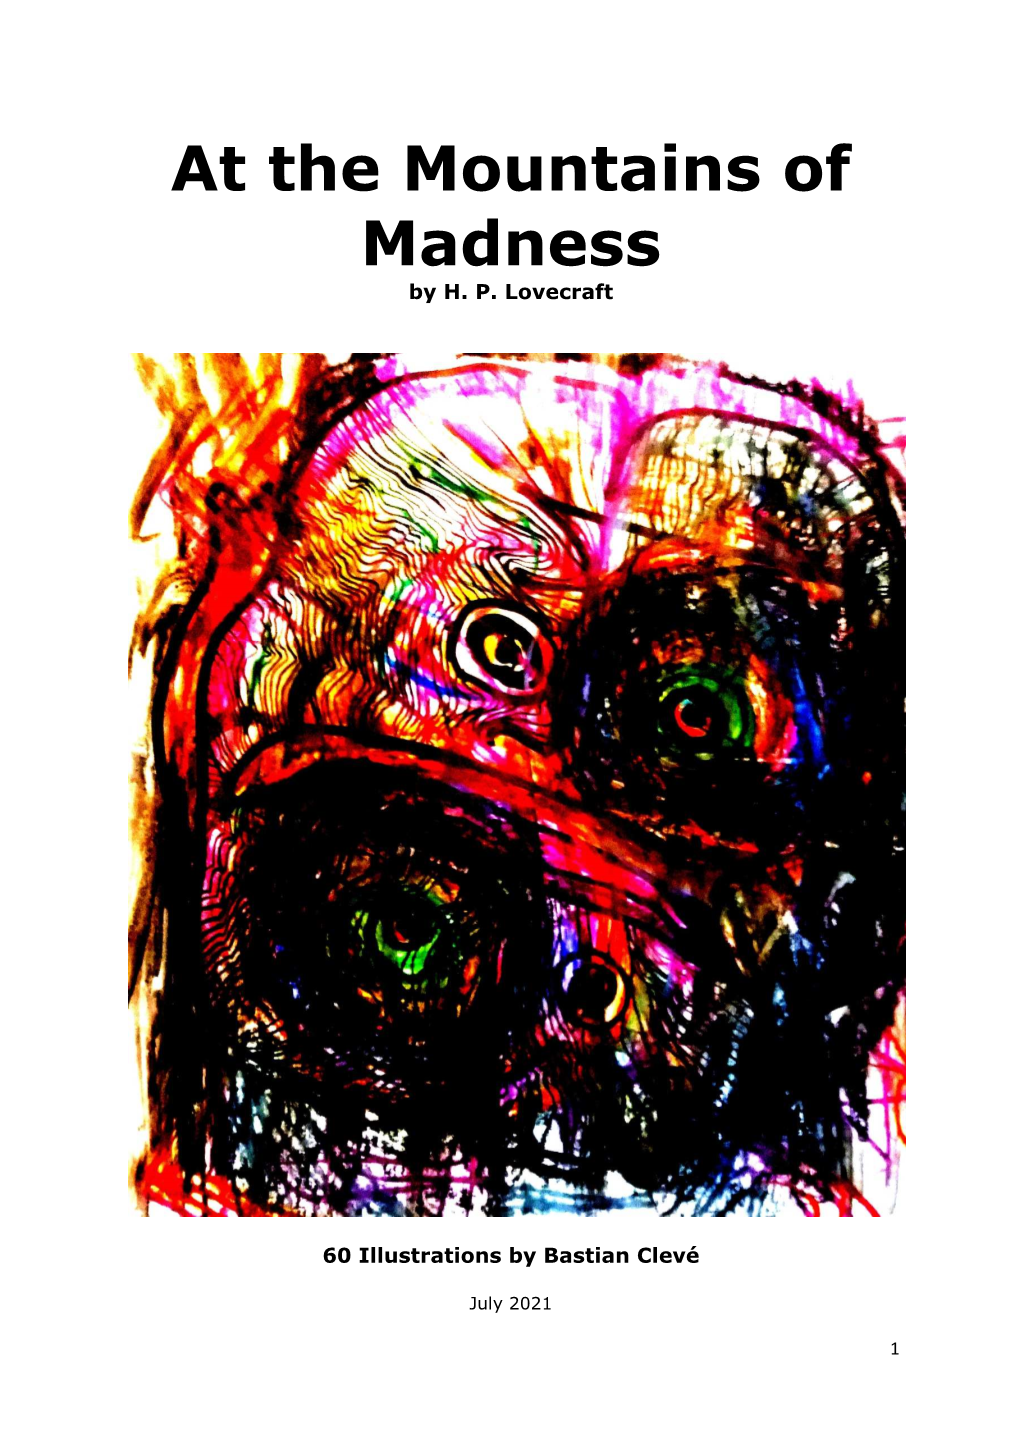 At the Mountains of Madness by H